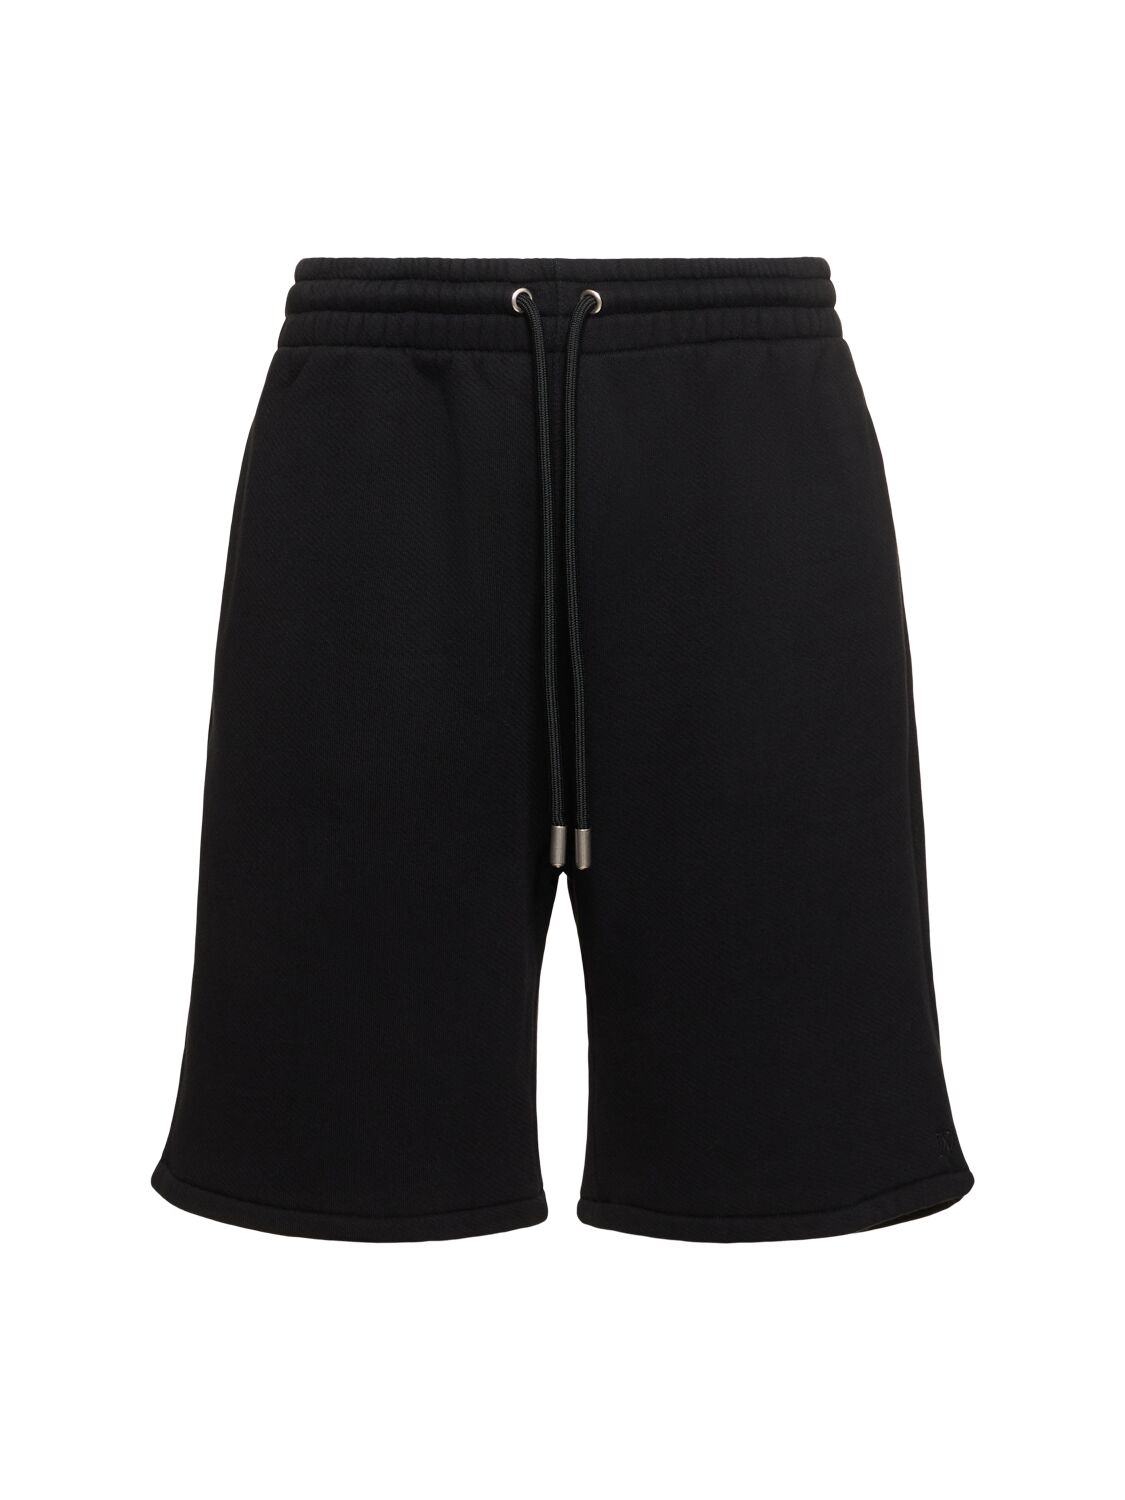 Off-white Ow Embroidery Cotton Skate Sweat Shorts In Black